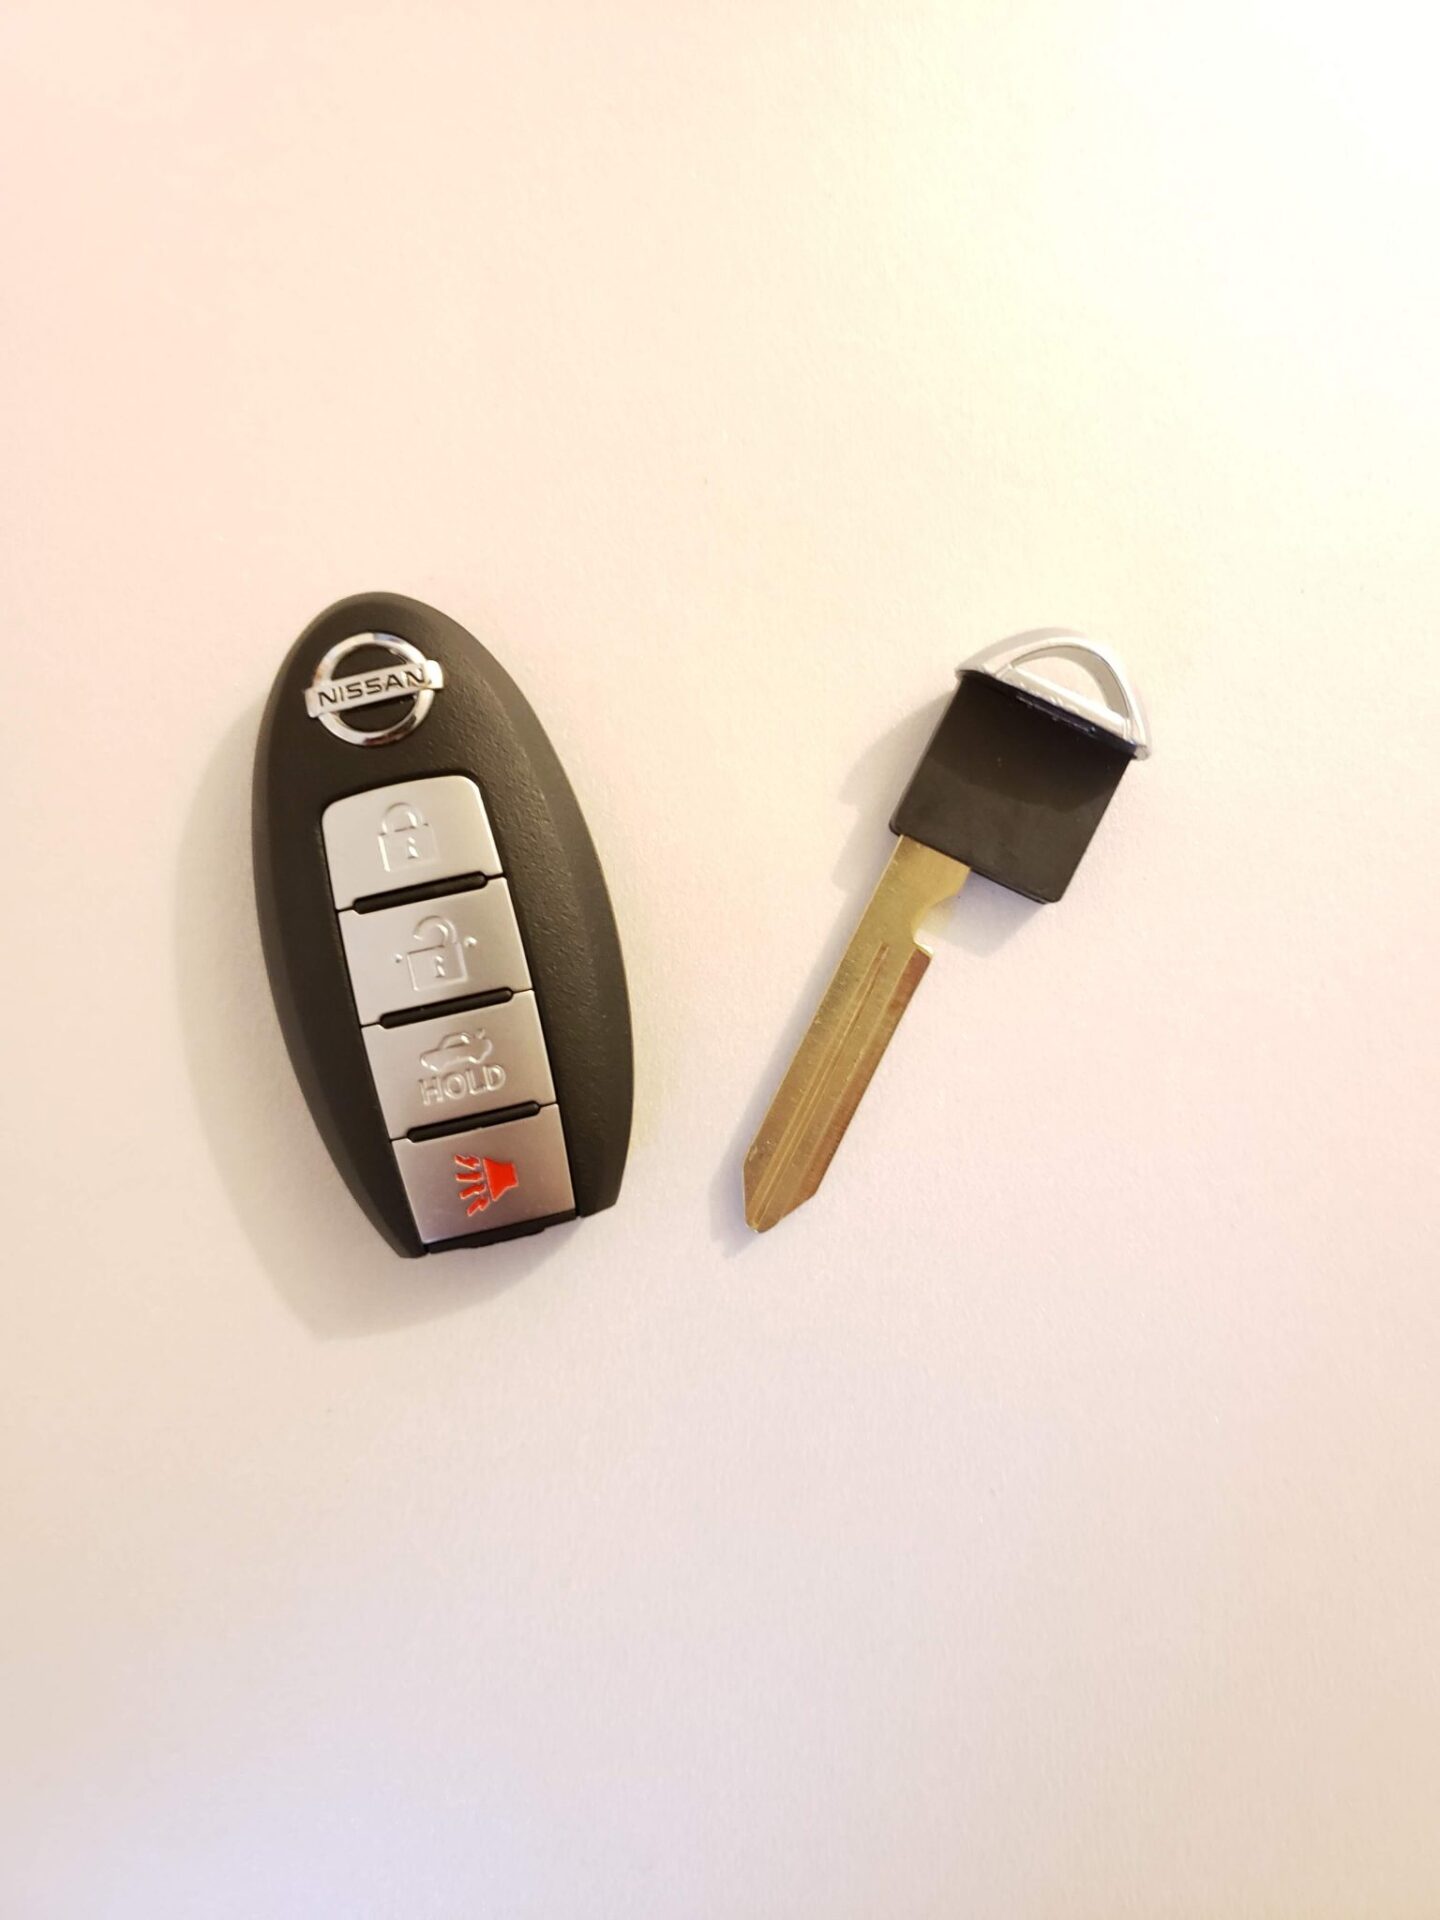 Nissan Kicks Key Replacement What To Do, Options, Costs & More